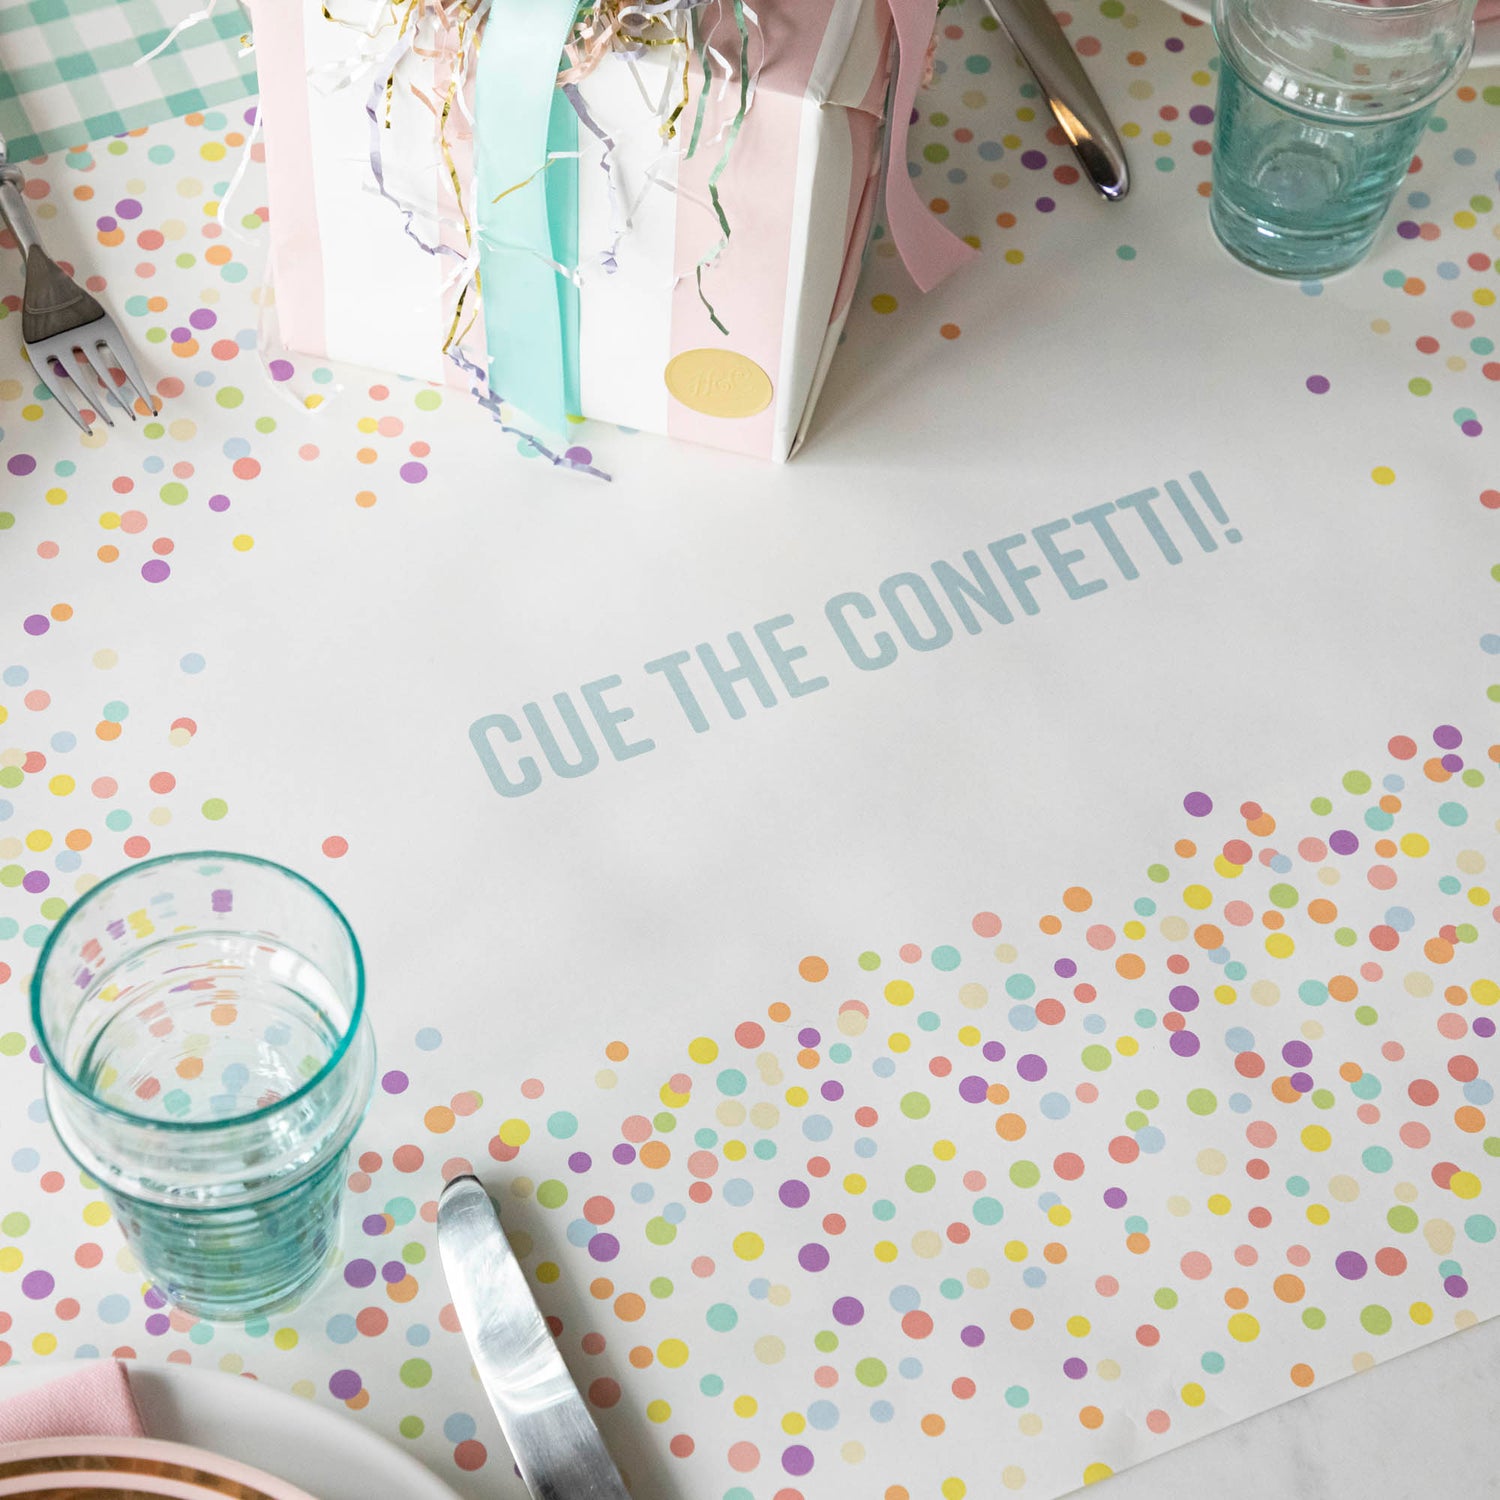 The Confetti Sprinkles Personalized Runner under a birthday table setting, with &quot;CUE THE CONFETTI!&quot; printed in blue.